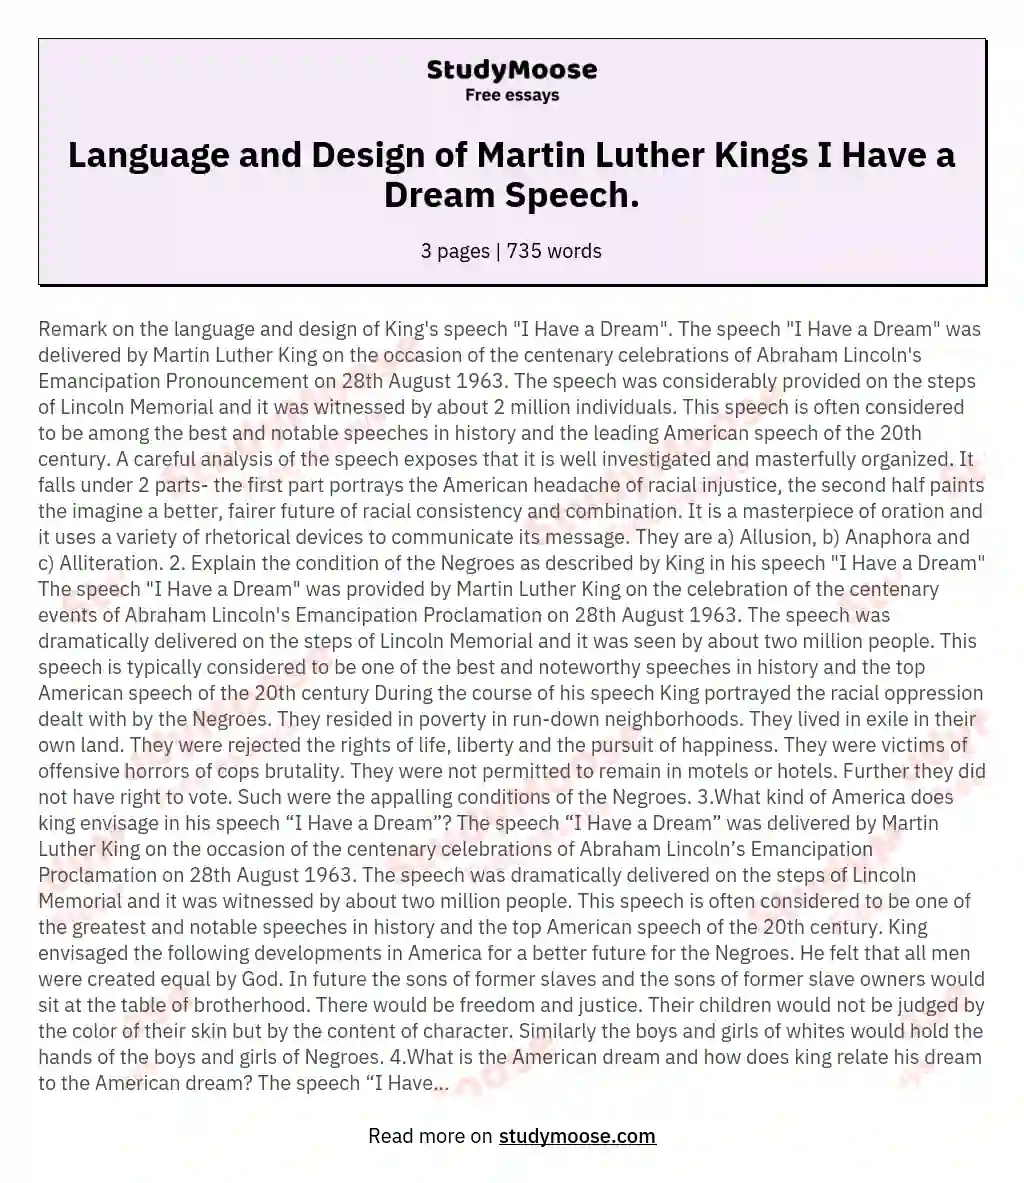 Language and Design of Martin Luther Kings I Have a Dream Speech. essay